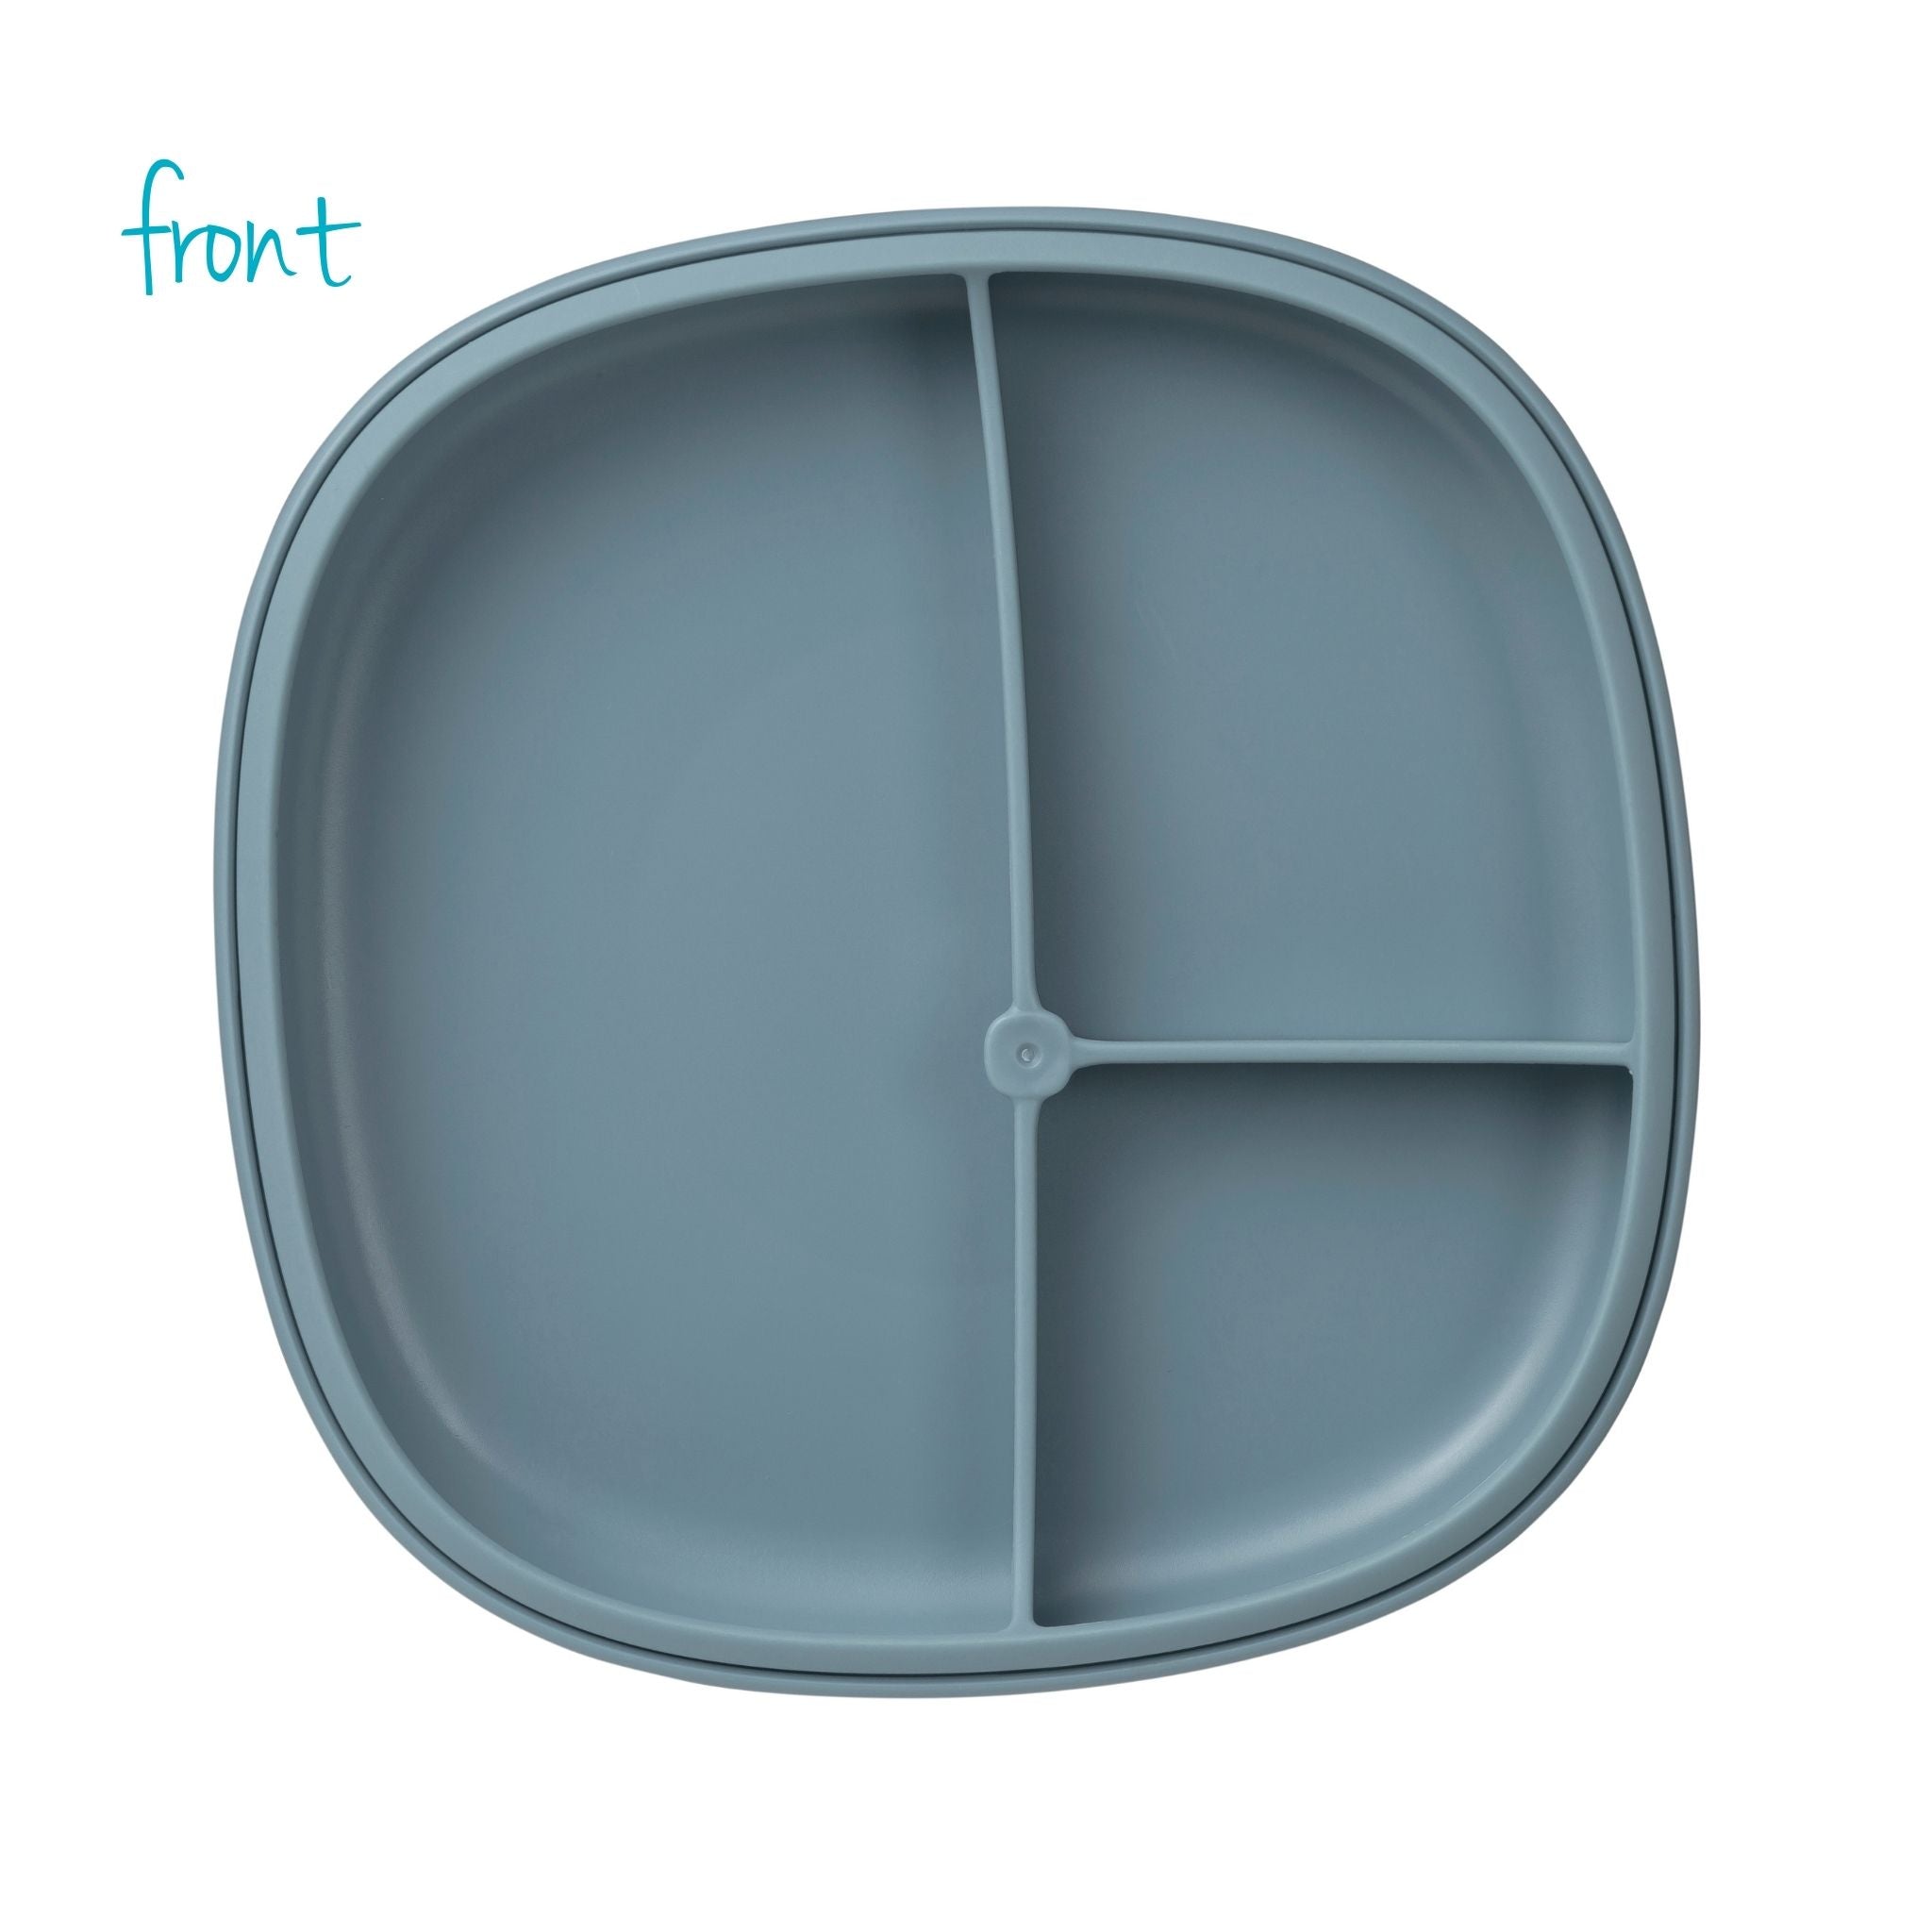 2 in 1 suction plate ocean